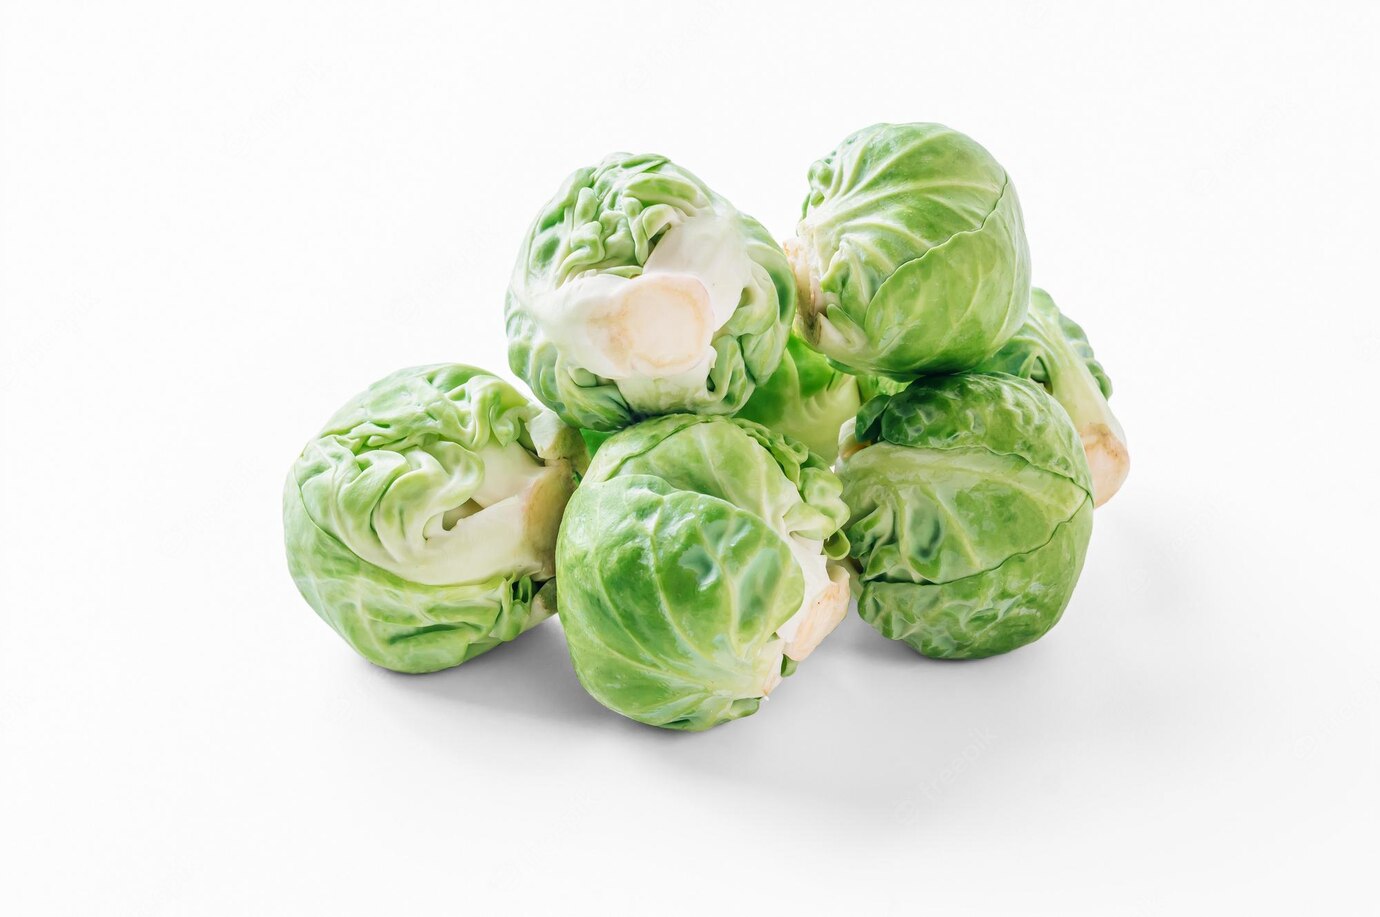 fresh-green-brussel-sprouts-vegetable-white-background_259258-1526